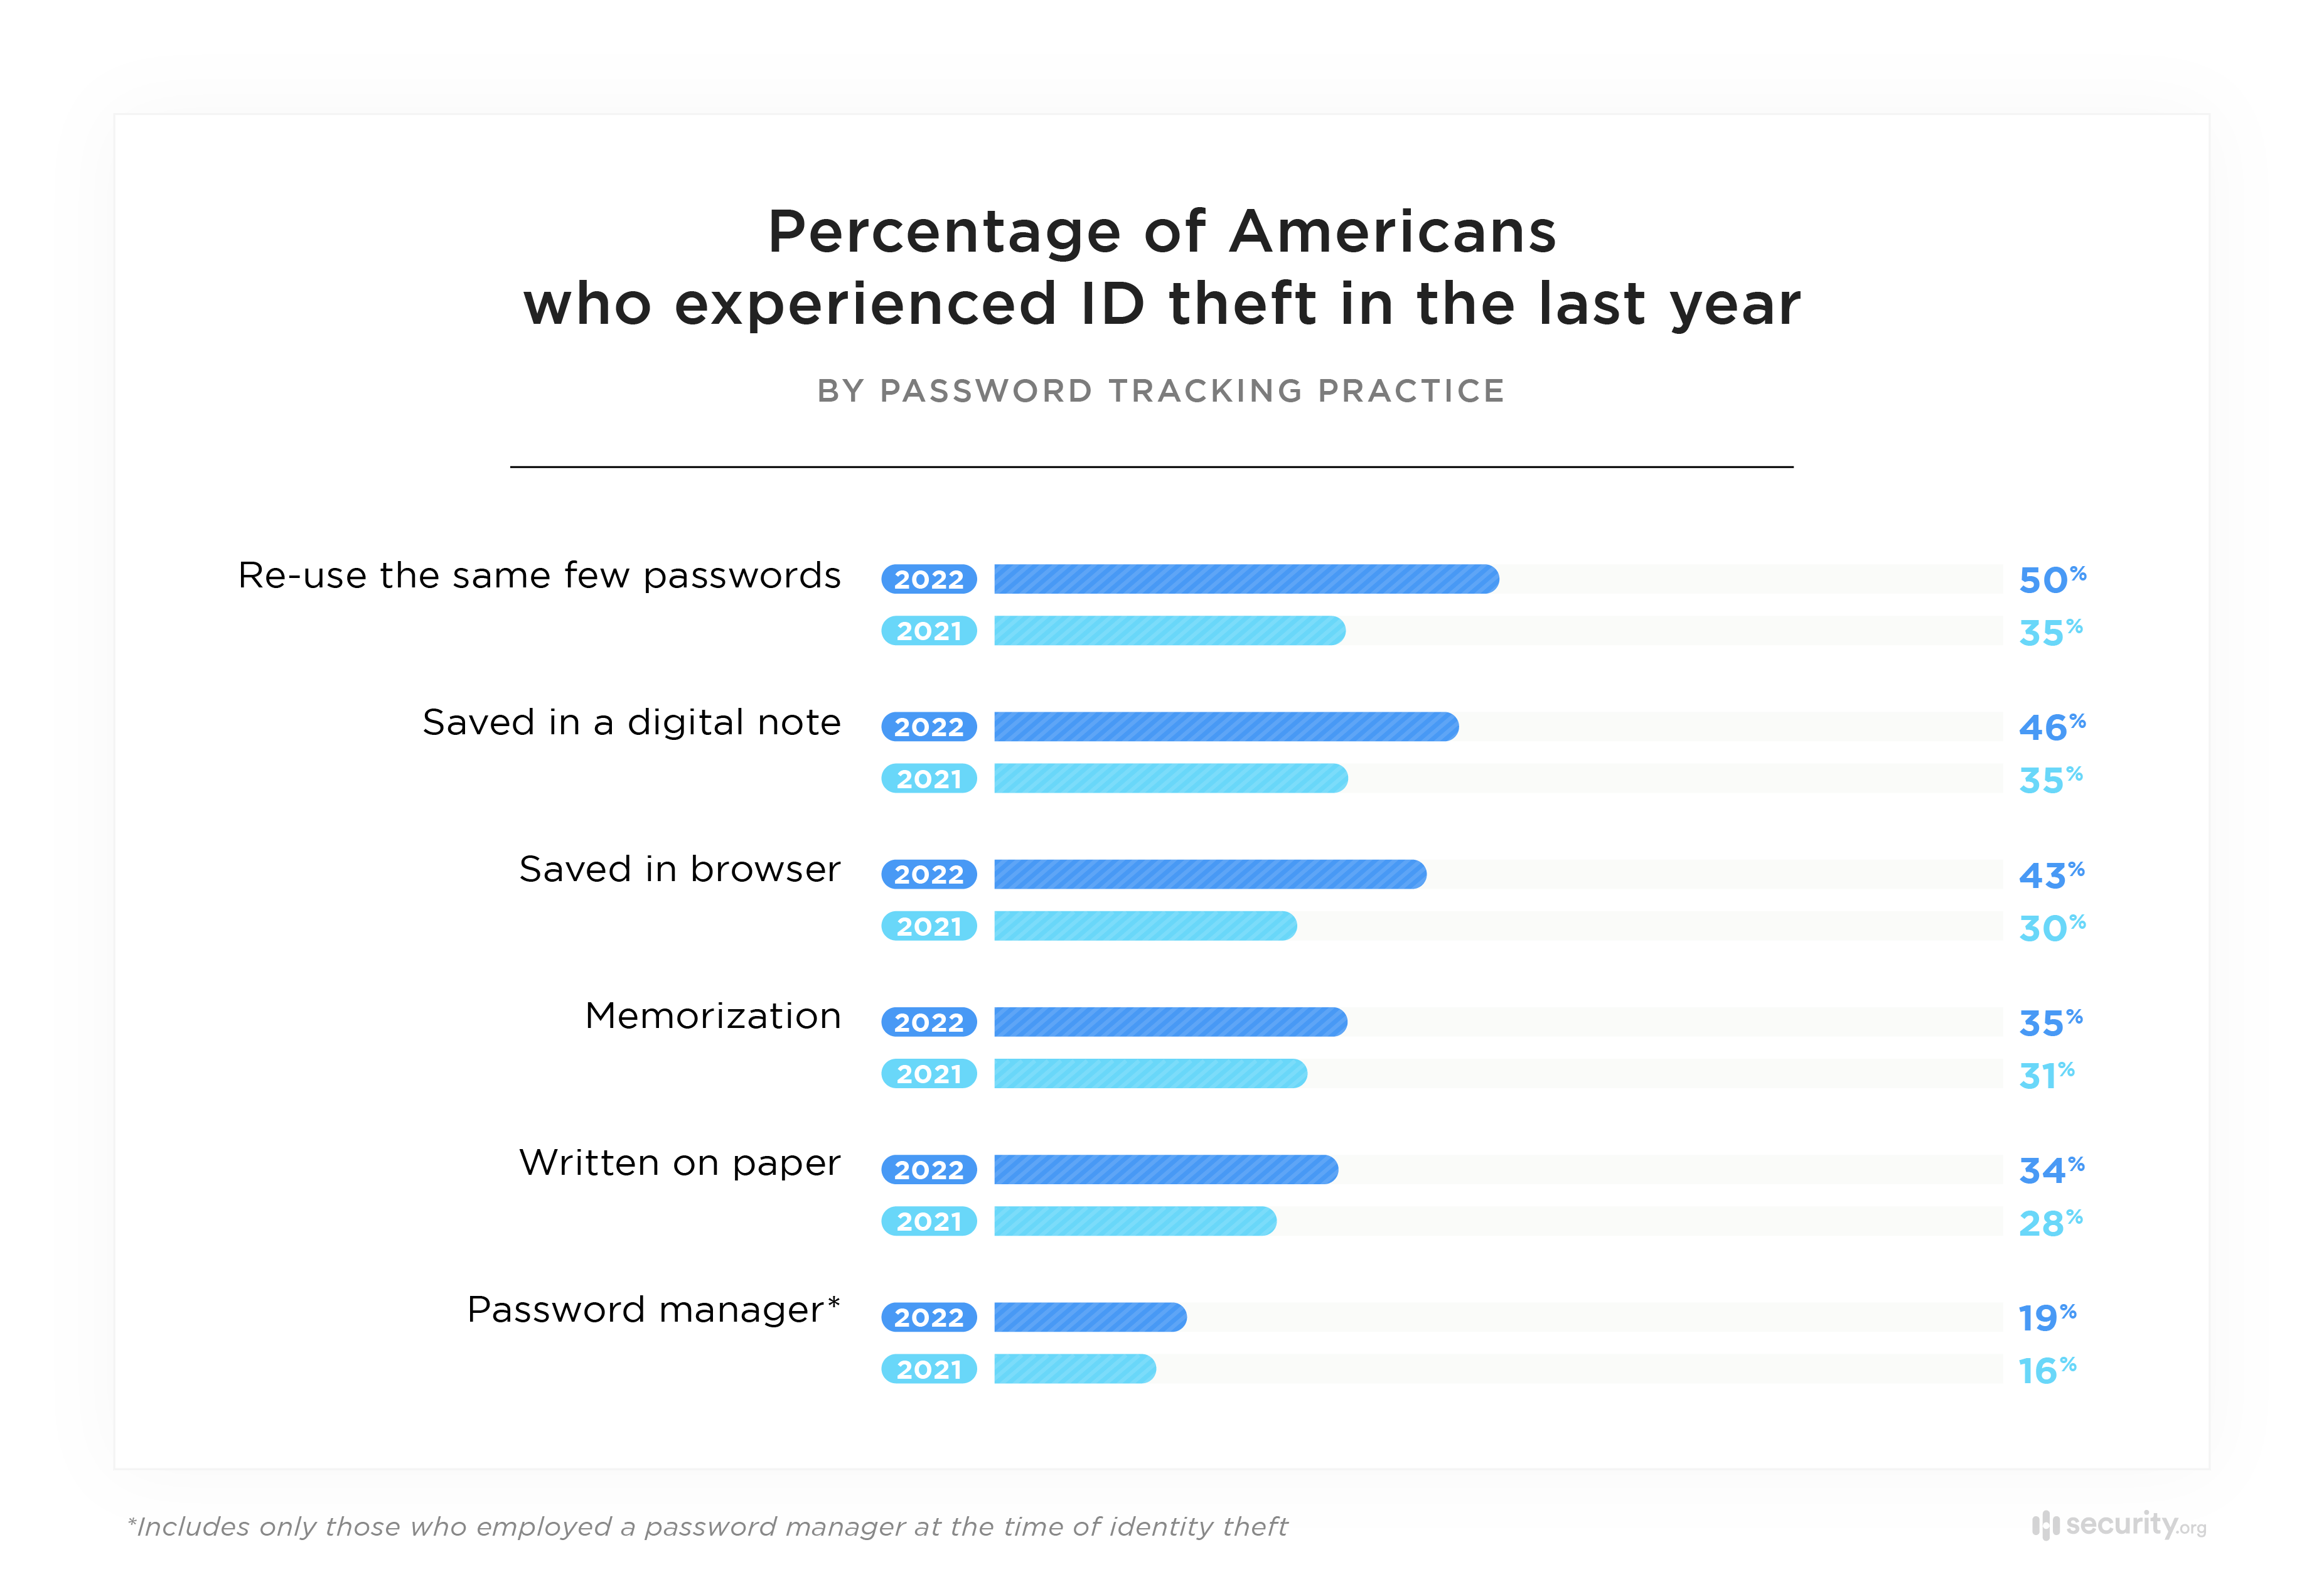 Percentage of Americans who experienced ID theft in the last year